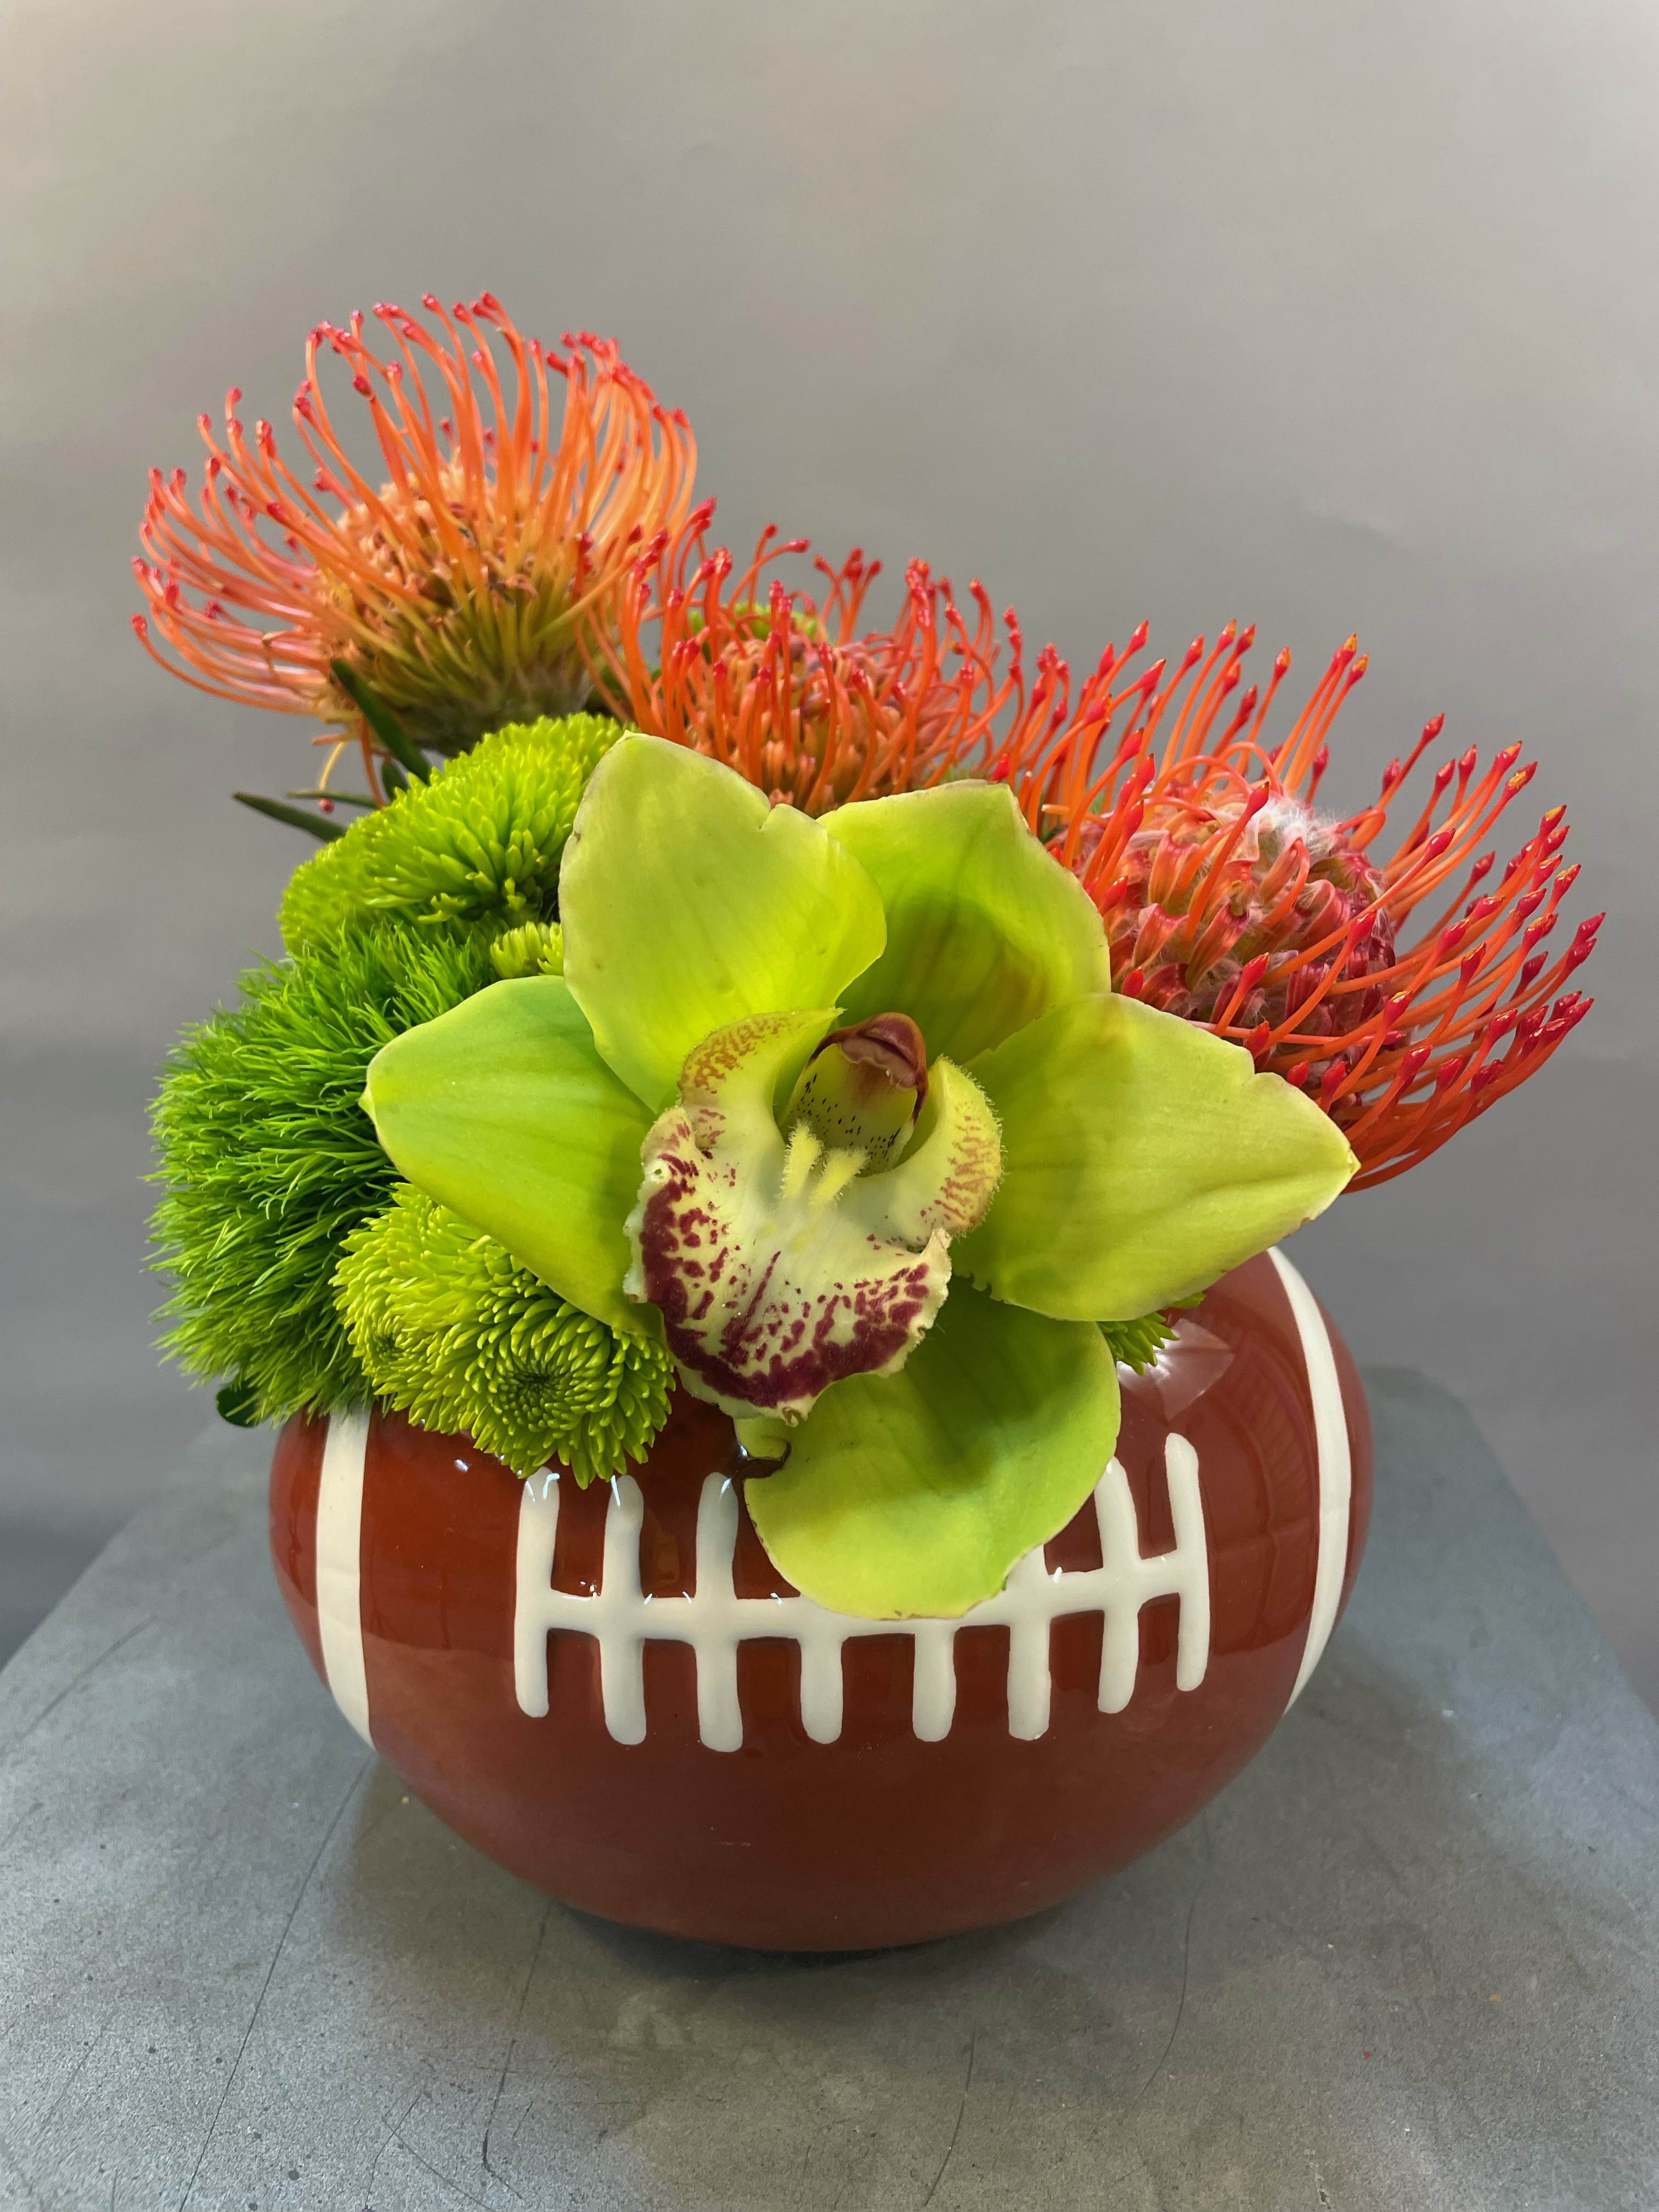 Yay Football! - A mini football arrangement perfect for your game day party! 